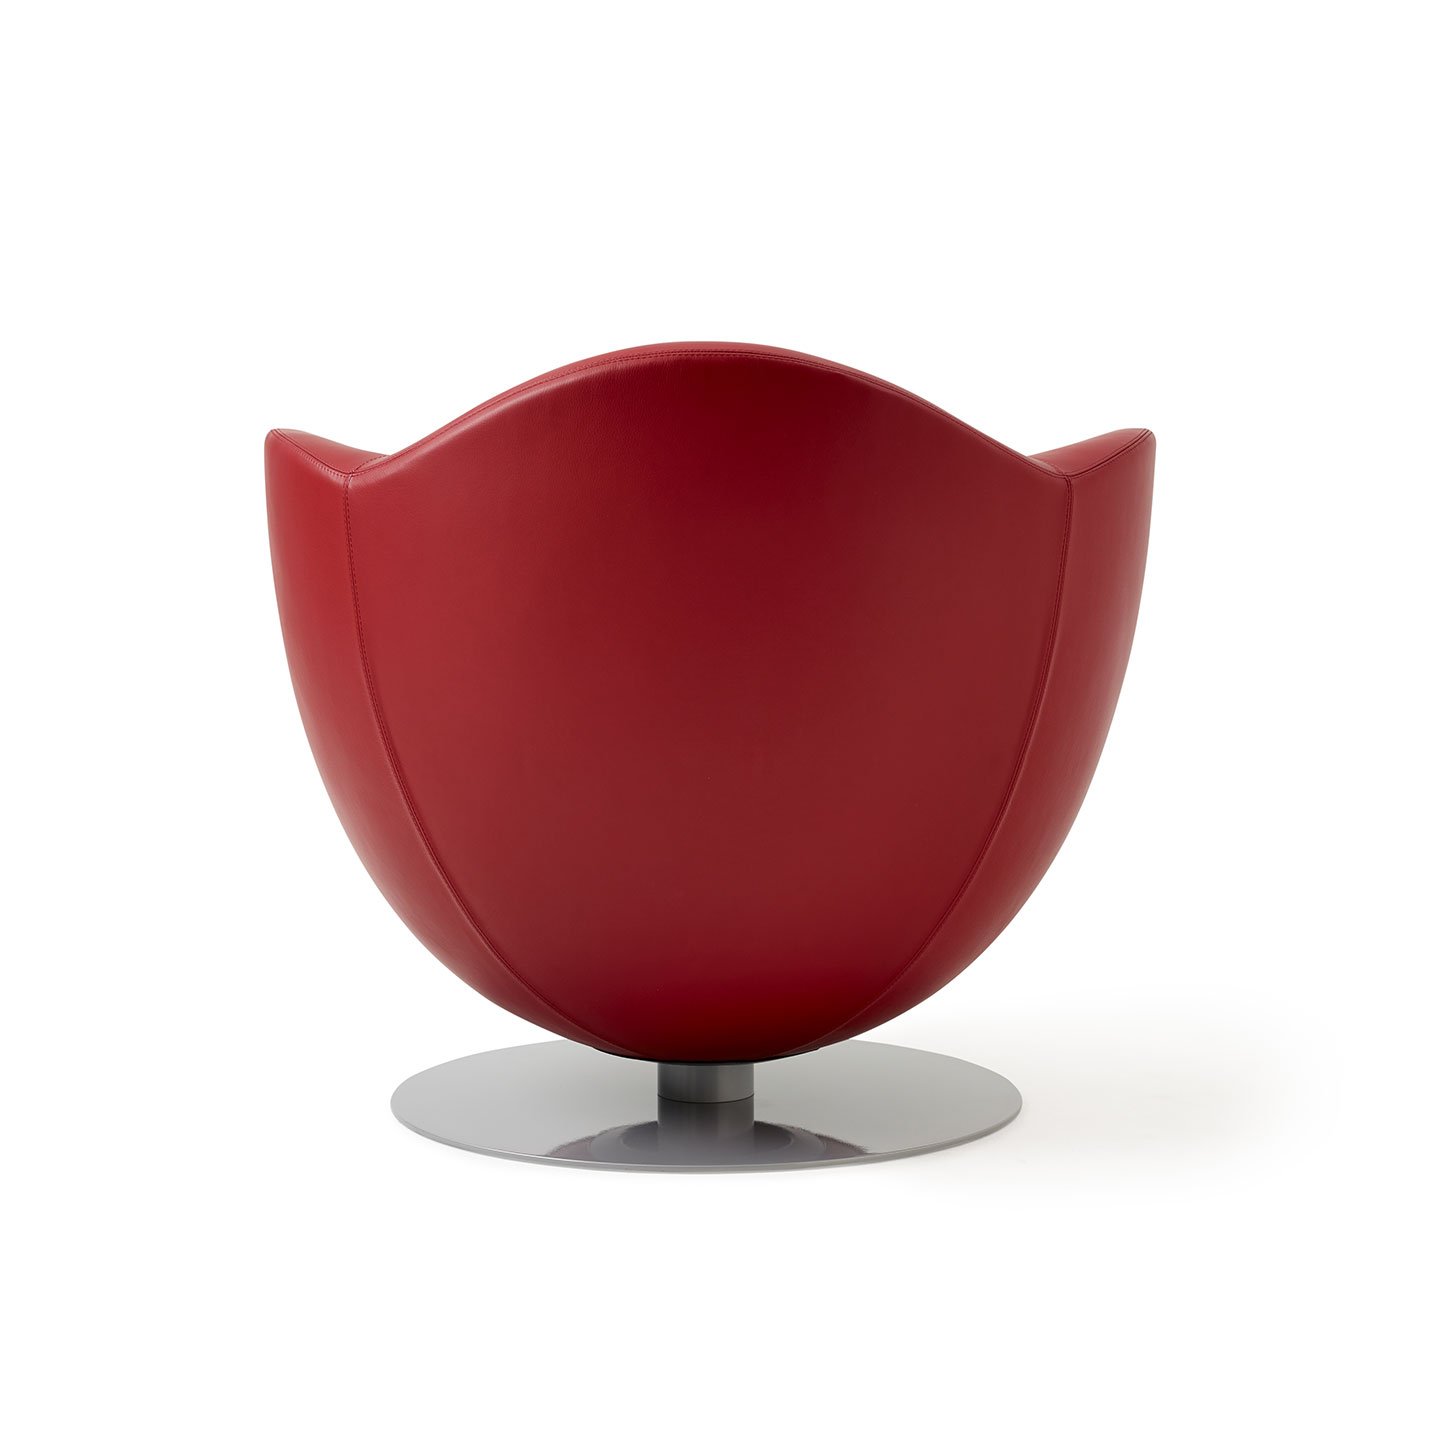 Haworth Dalia lounge chair in red leather as seen from the back